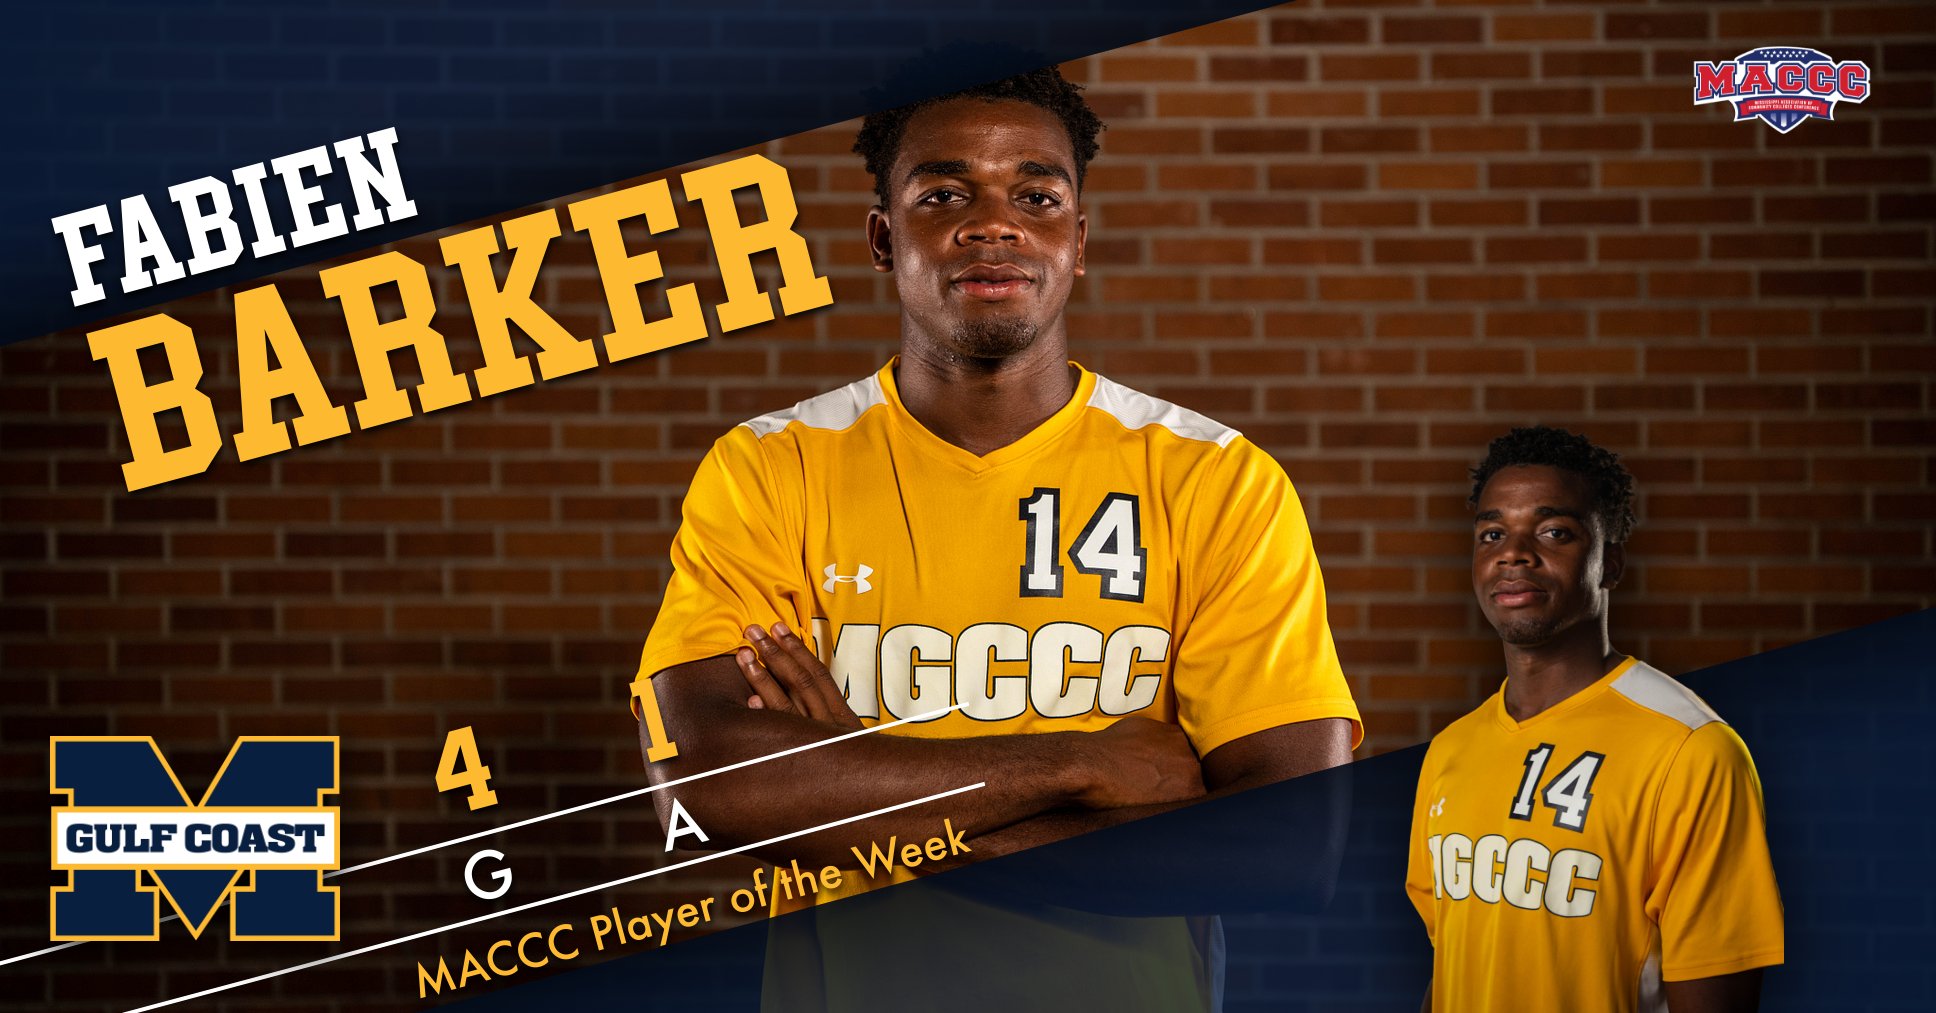 Barker grabs another MACCC Player of the Week